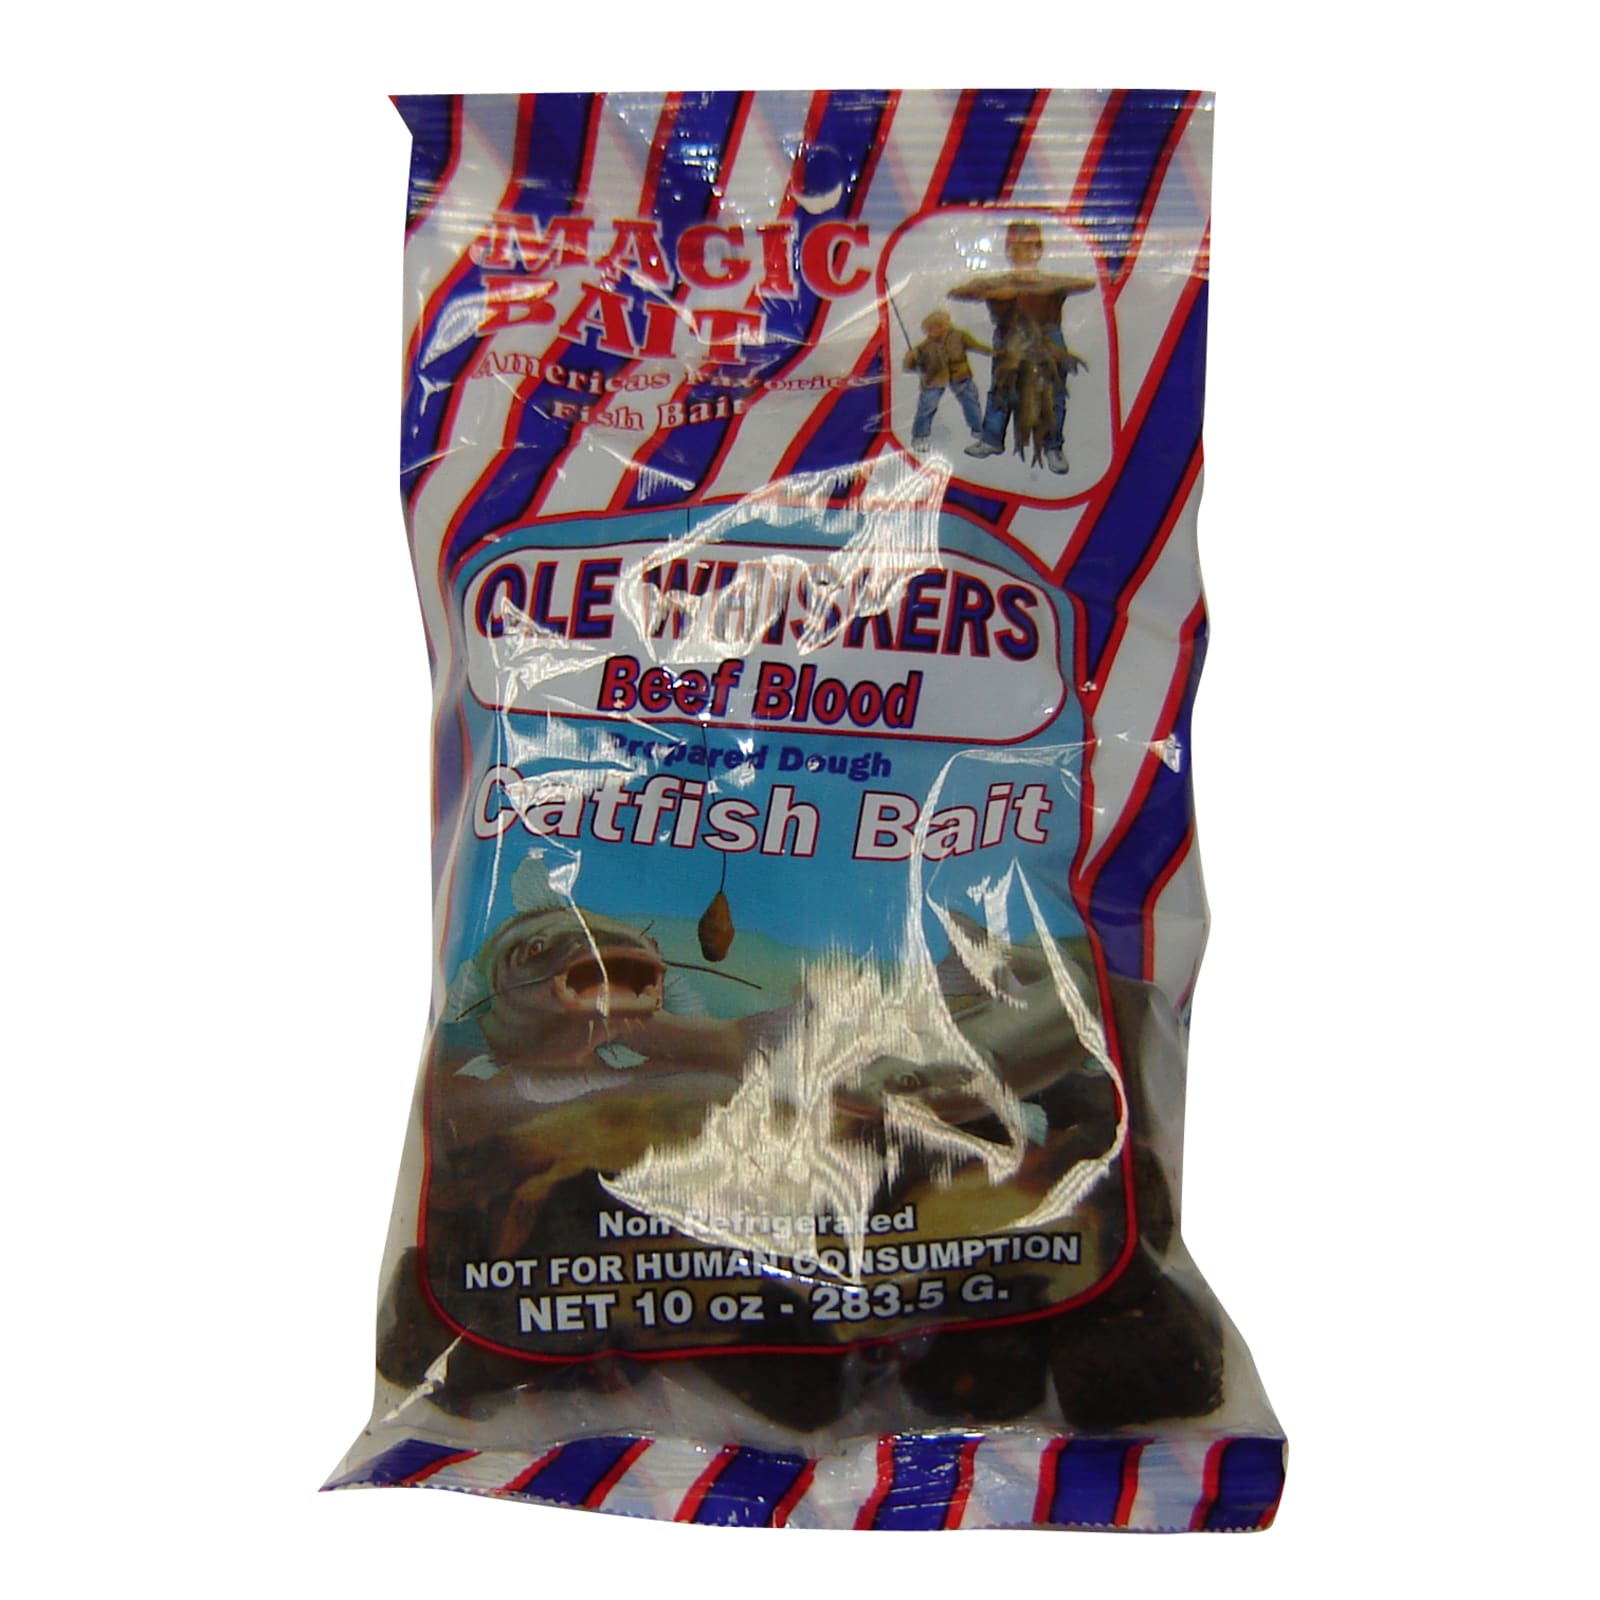 Cubed Catfish Bait - Ole Whiskers Beef Blood by Magic Bait at Fleet Farm